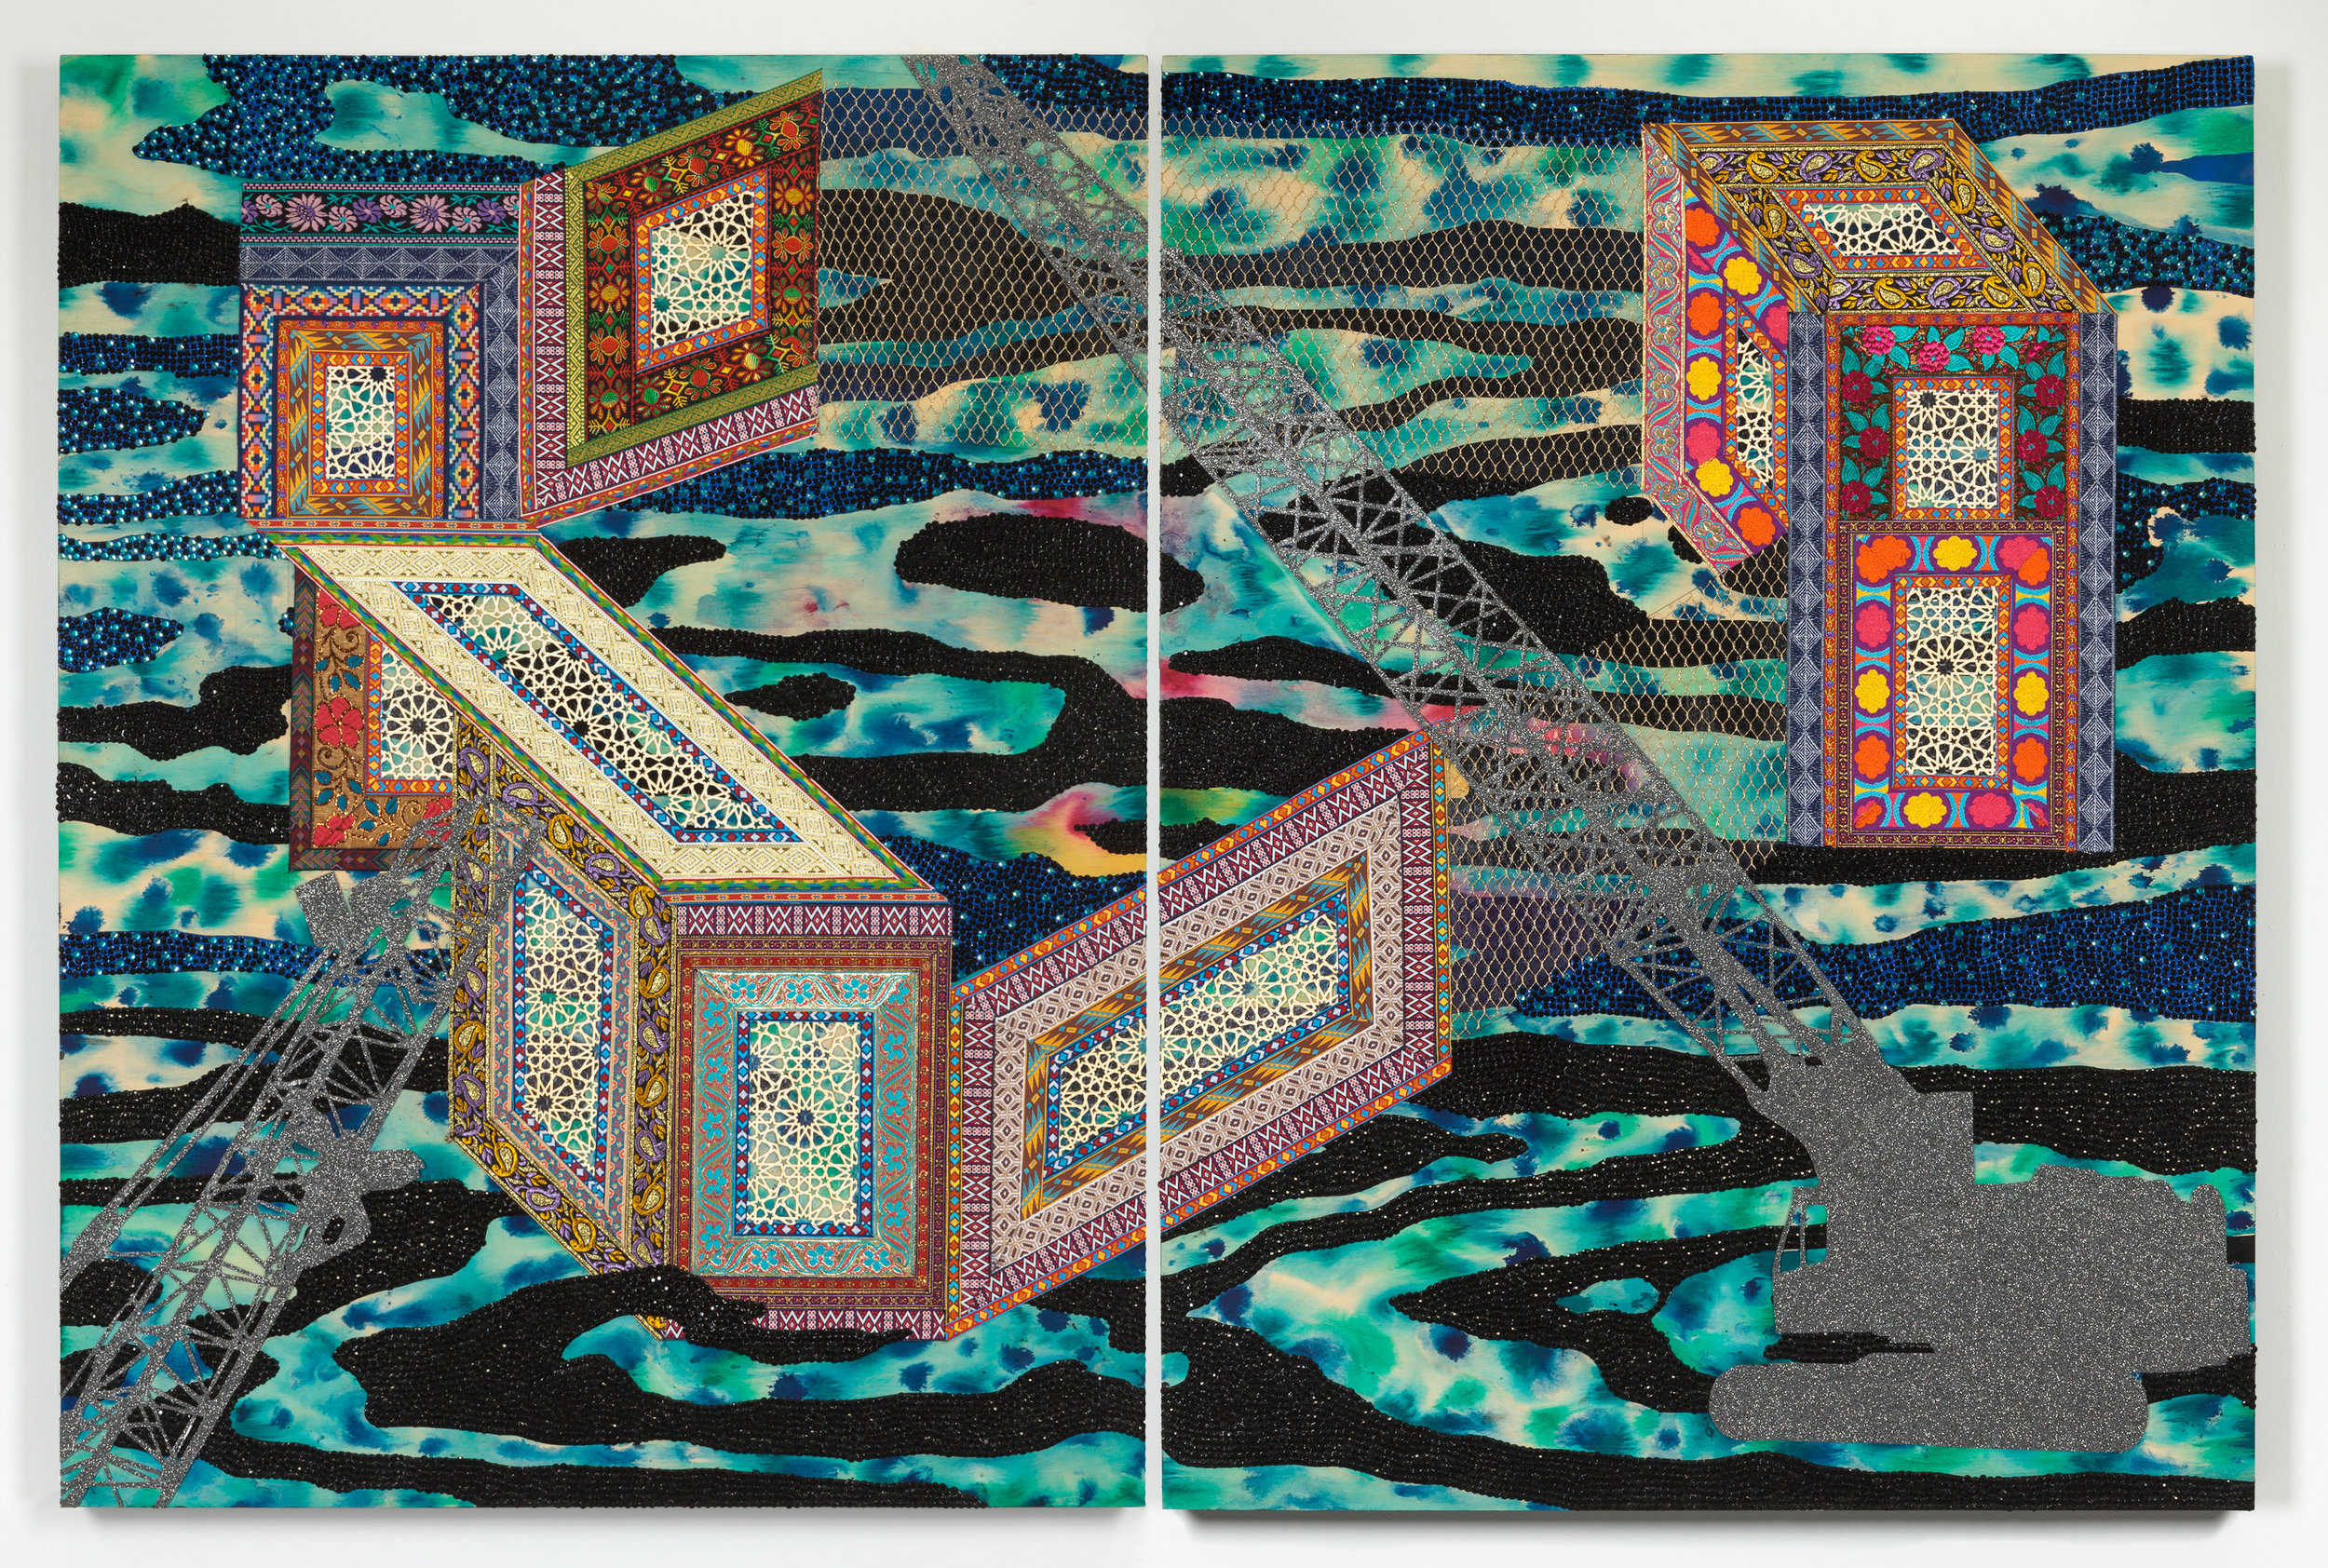  Visual Heteroglossia: Excavation of the Gentry, 2016 Jacquard textiles, laser cut Arches watercolor paper, vinyl, jewels, concentrated watercolor and acrylic on wood panel 40" x 60" x 2" 